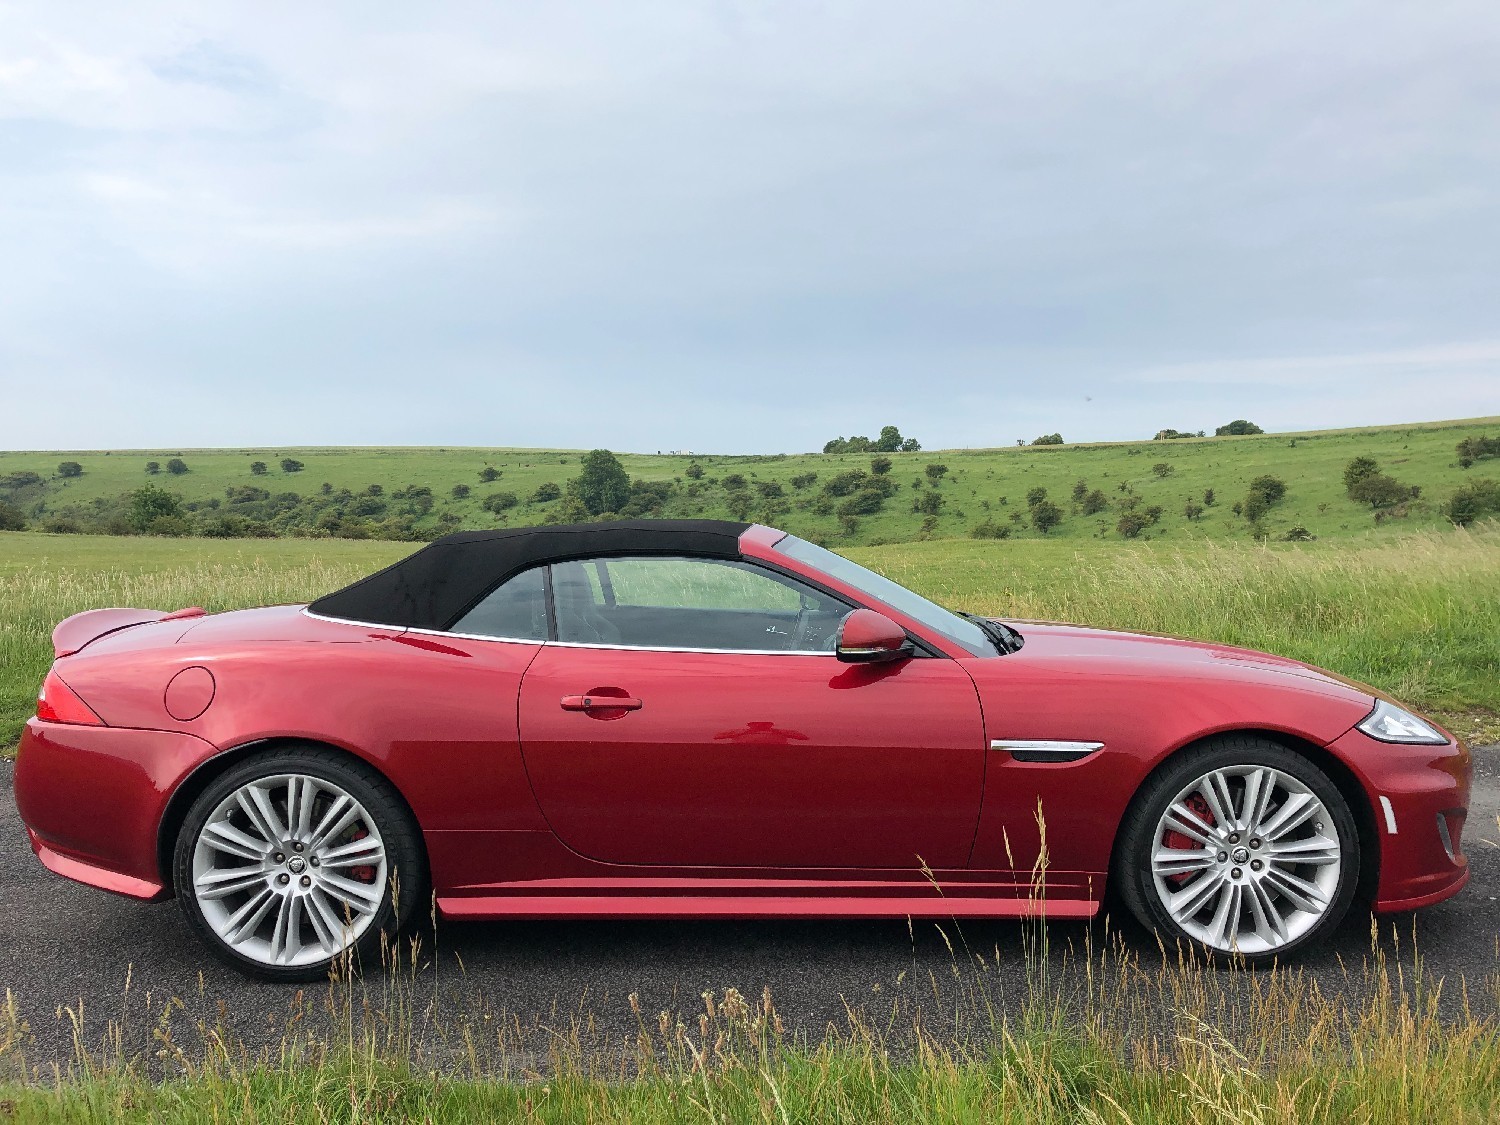 Used JAGUAR XKR in BN3 3TW, Sussex | SG Group and Sons